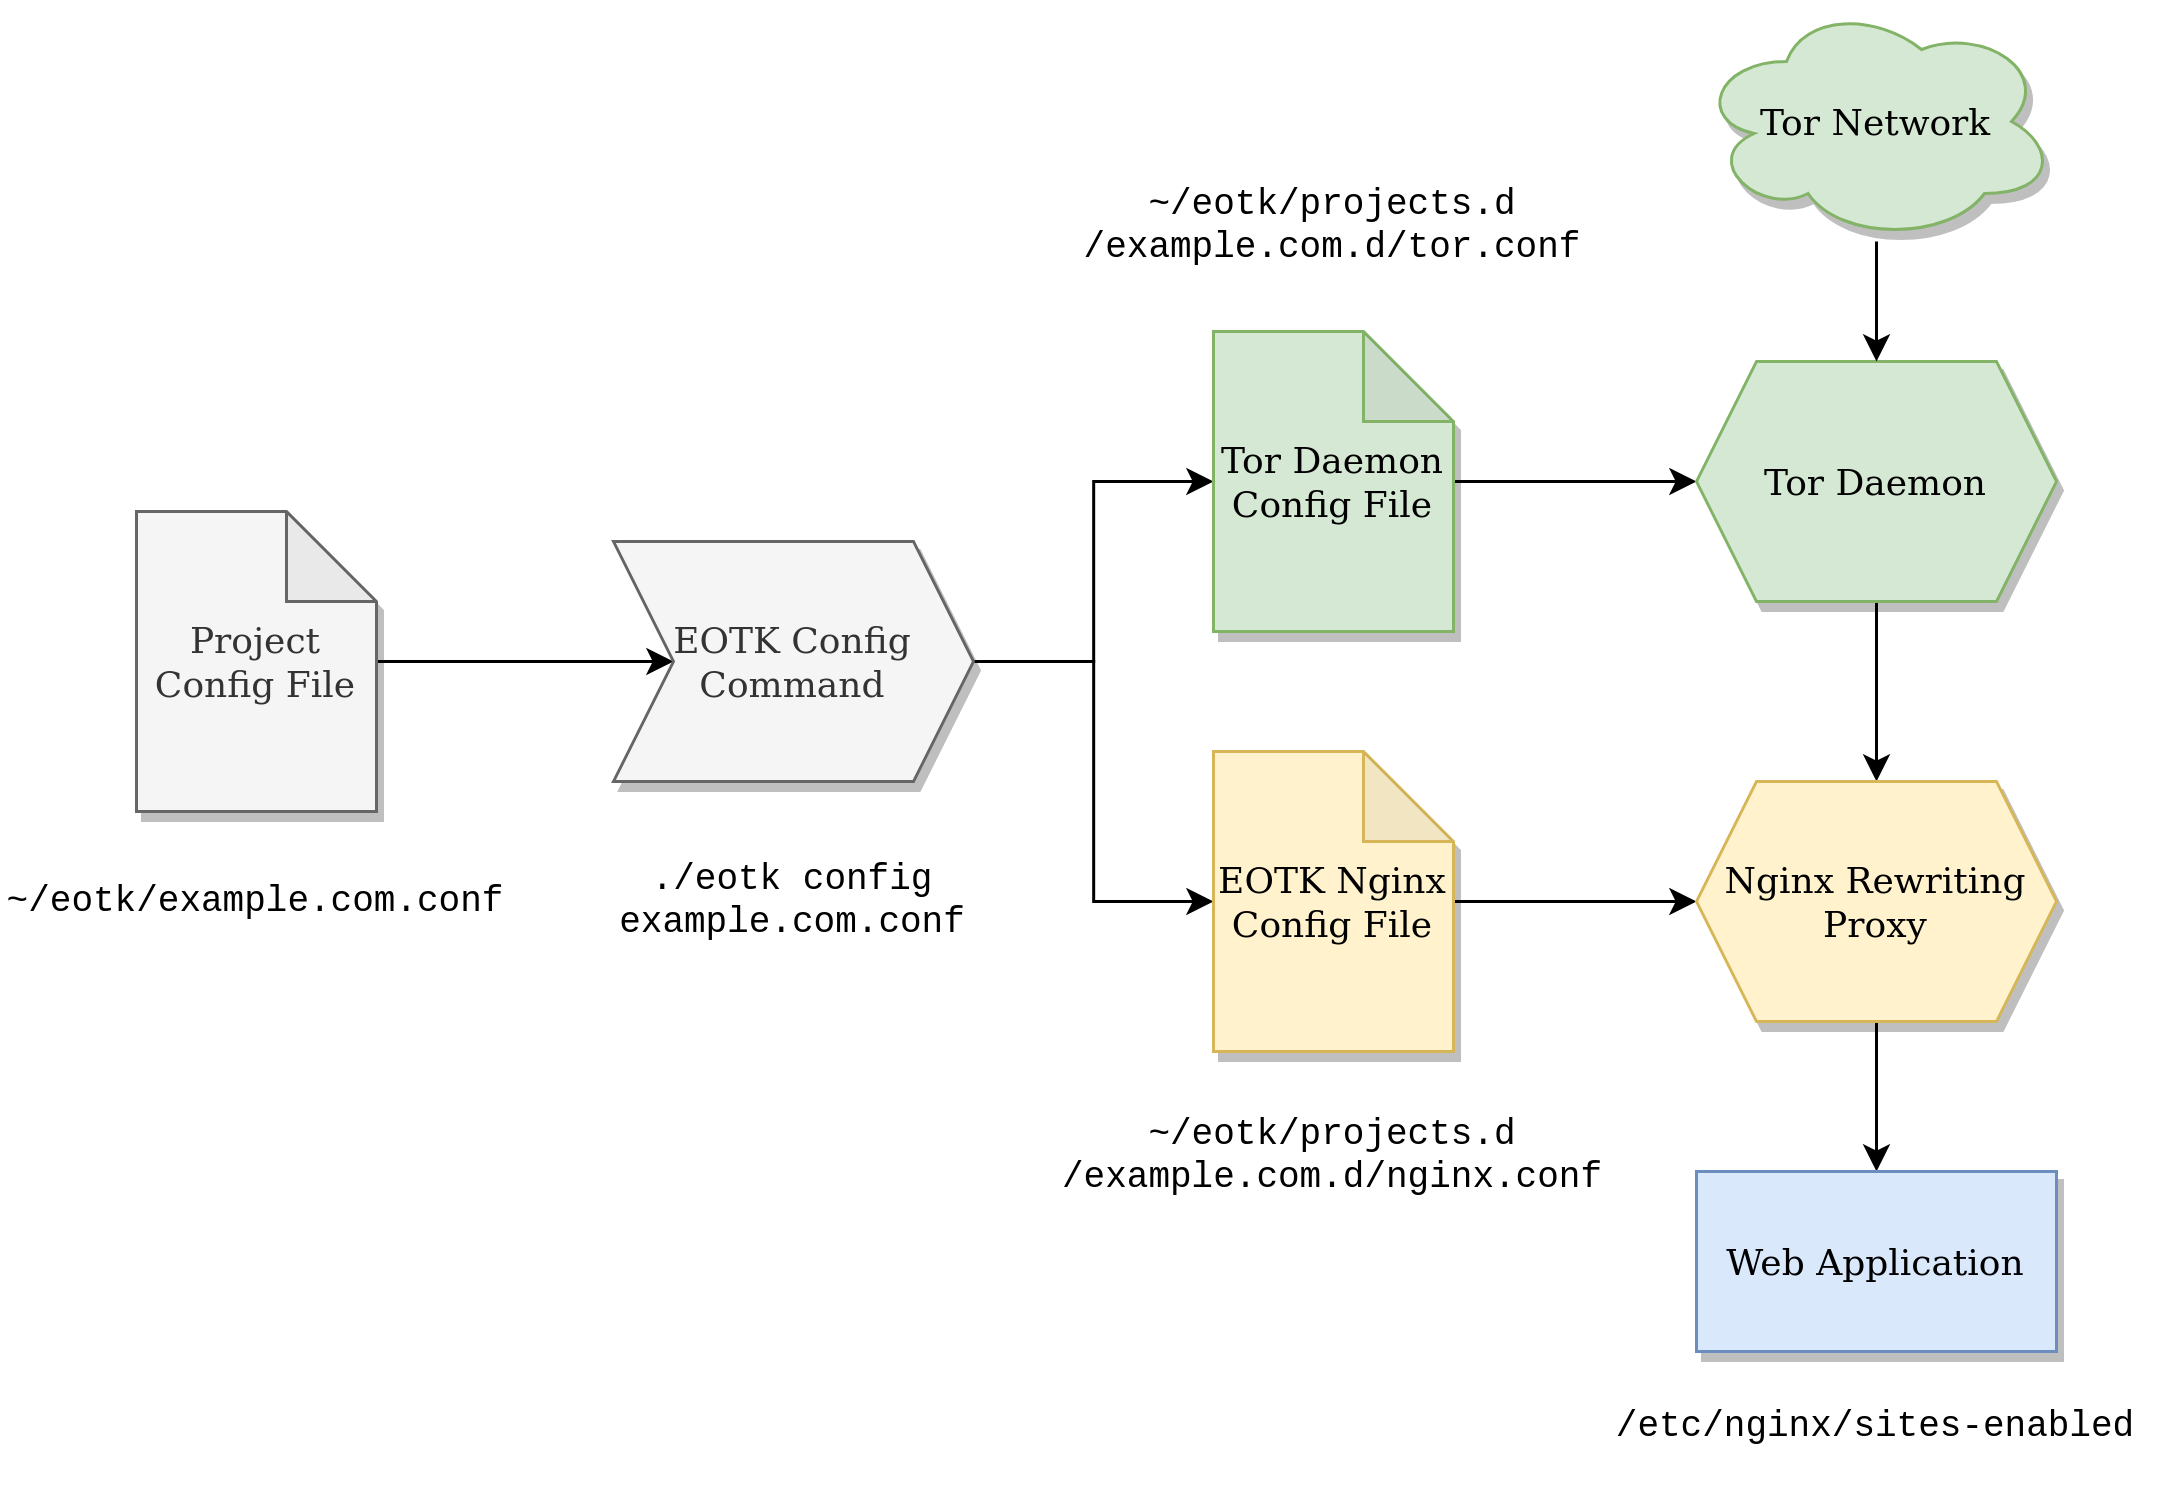 A flowchart of what the EOTK configure command does. A project file is pointed towards a box labeled EOTK Config Command. The box has an arrow which branches out into two branches, that leads to two files, one called Tor Daemon Config File, and the other called EOTK Nginx Config File. Each of those Config files point towards a Daemon.